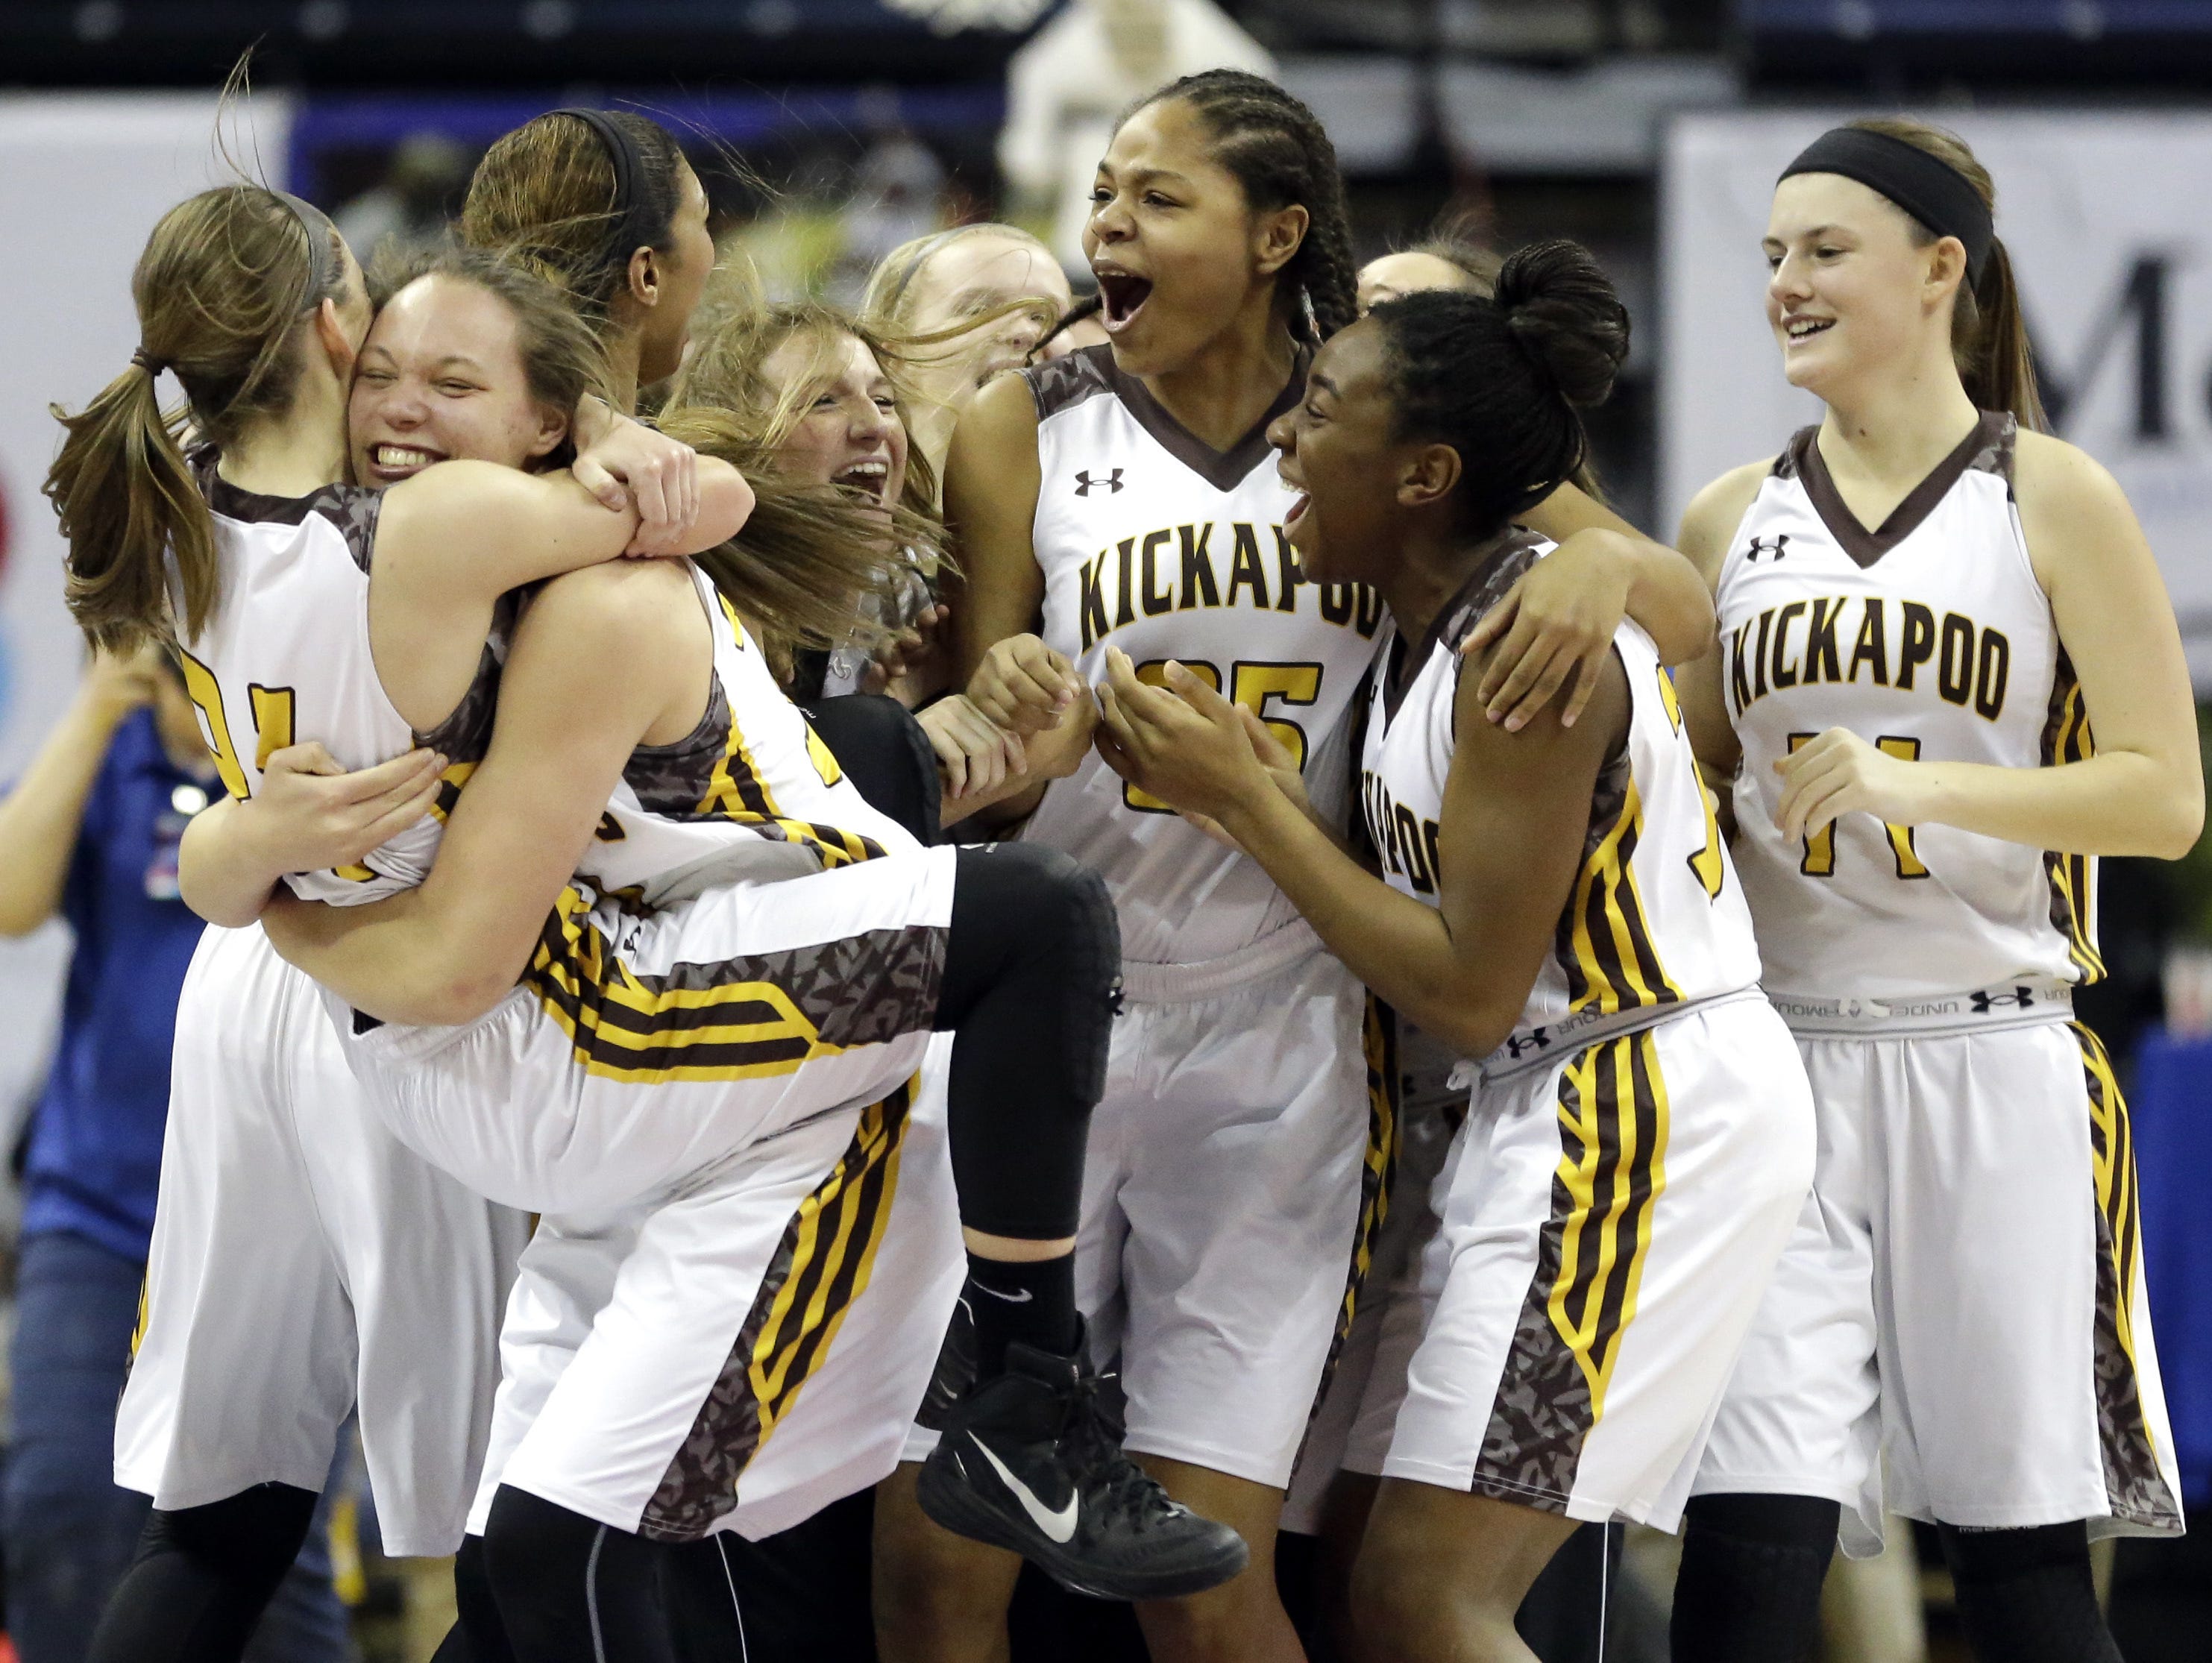 Kickapoo celebrates after defeating Kirkwood in the Class 5 state championship game.